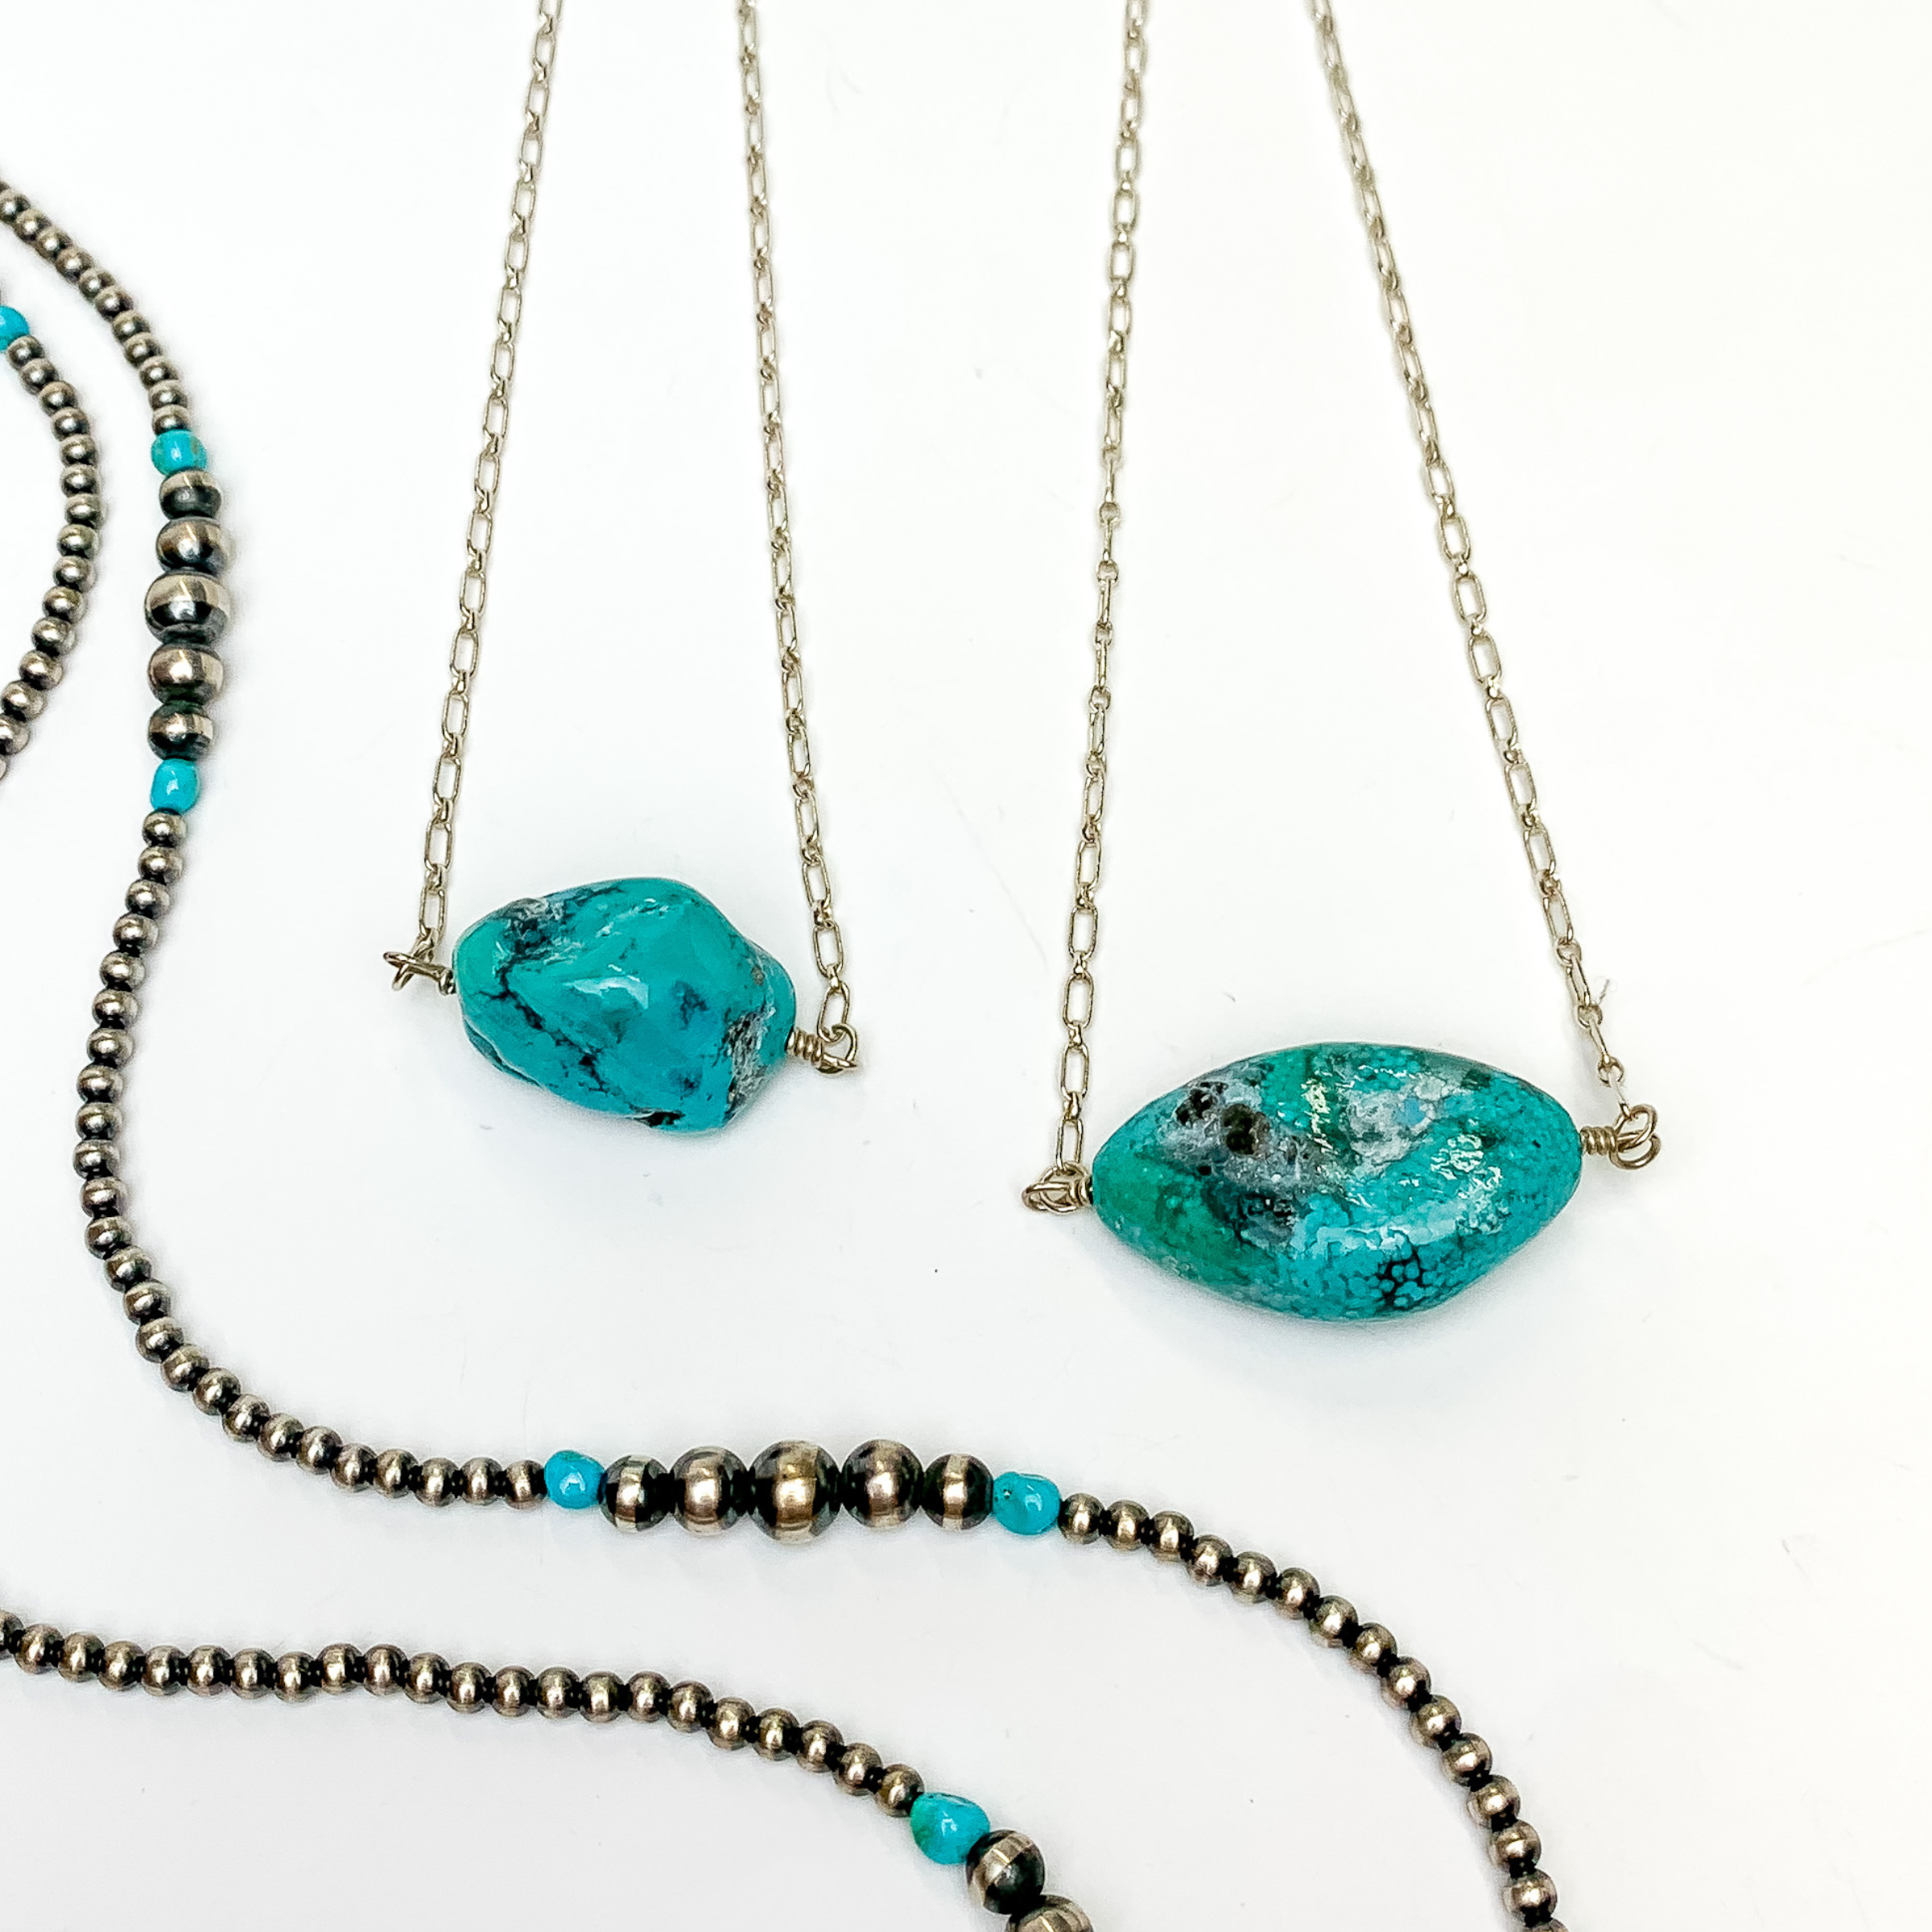 Navajo | Navajo Handmade Large Turquoise Chunk Stone on Silver Chain Necklace - Giddy Up Glamour Boutique